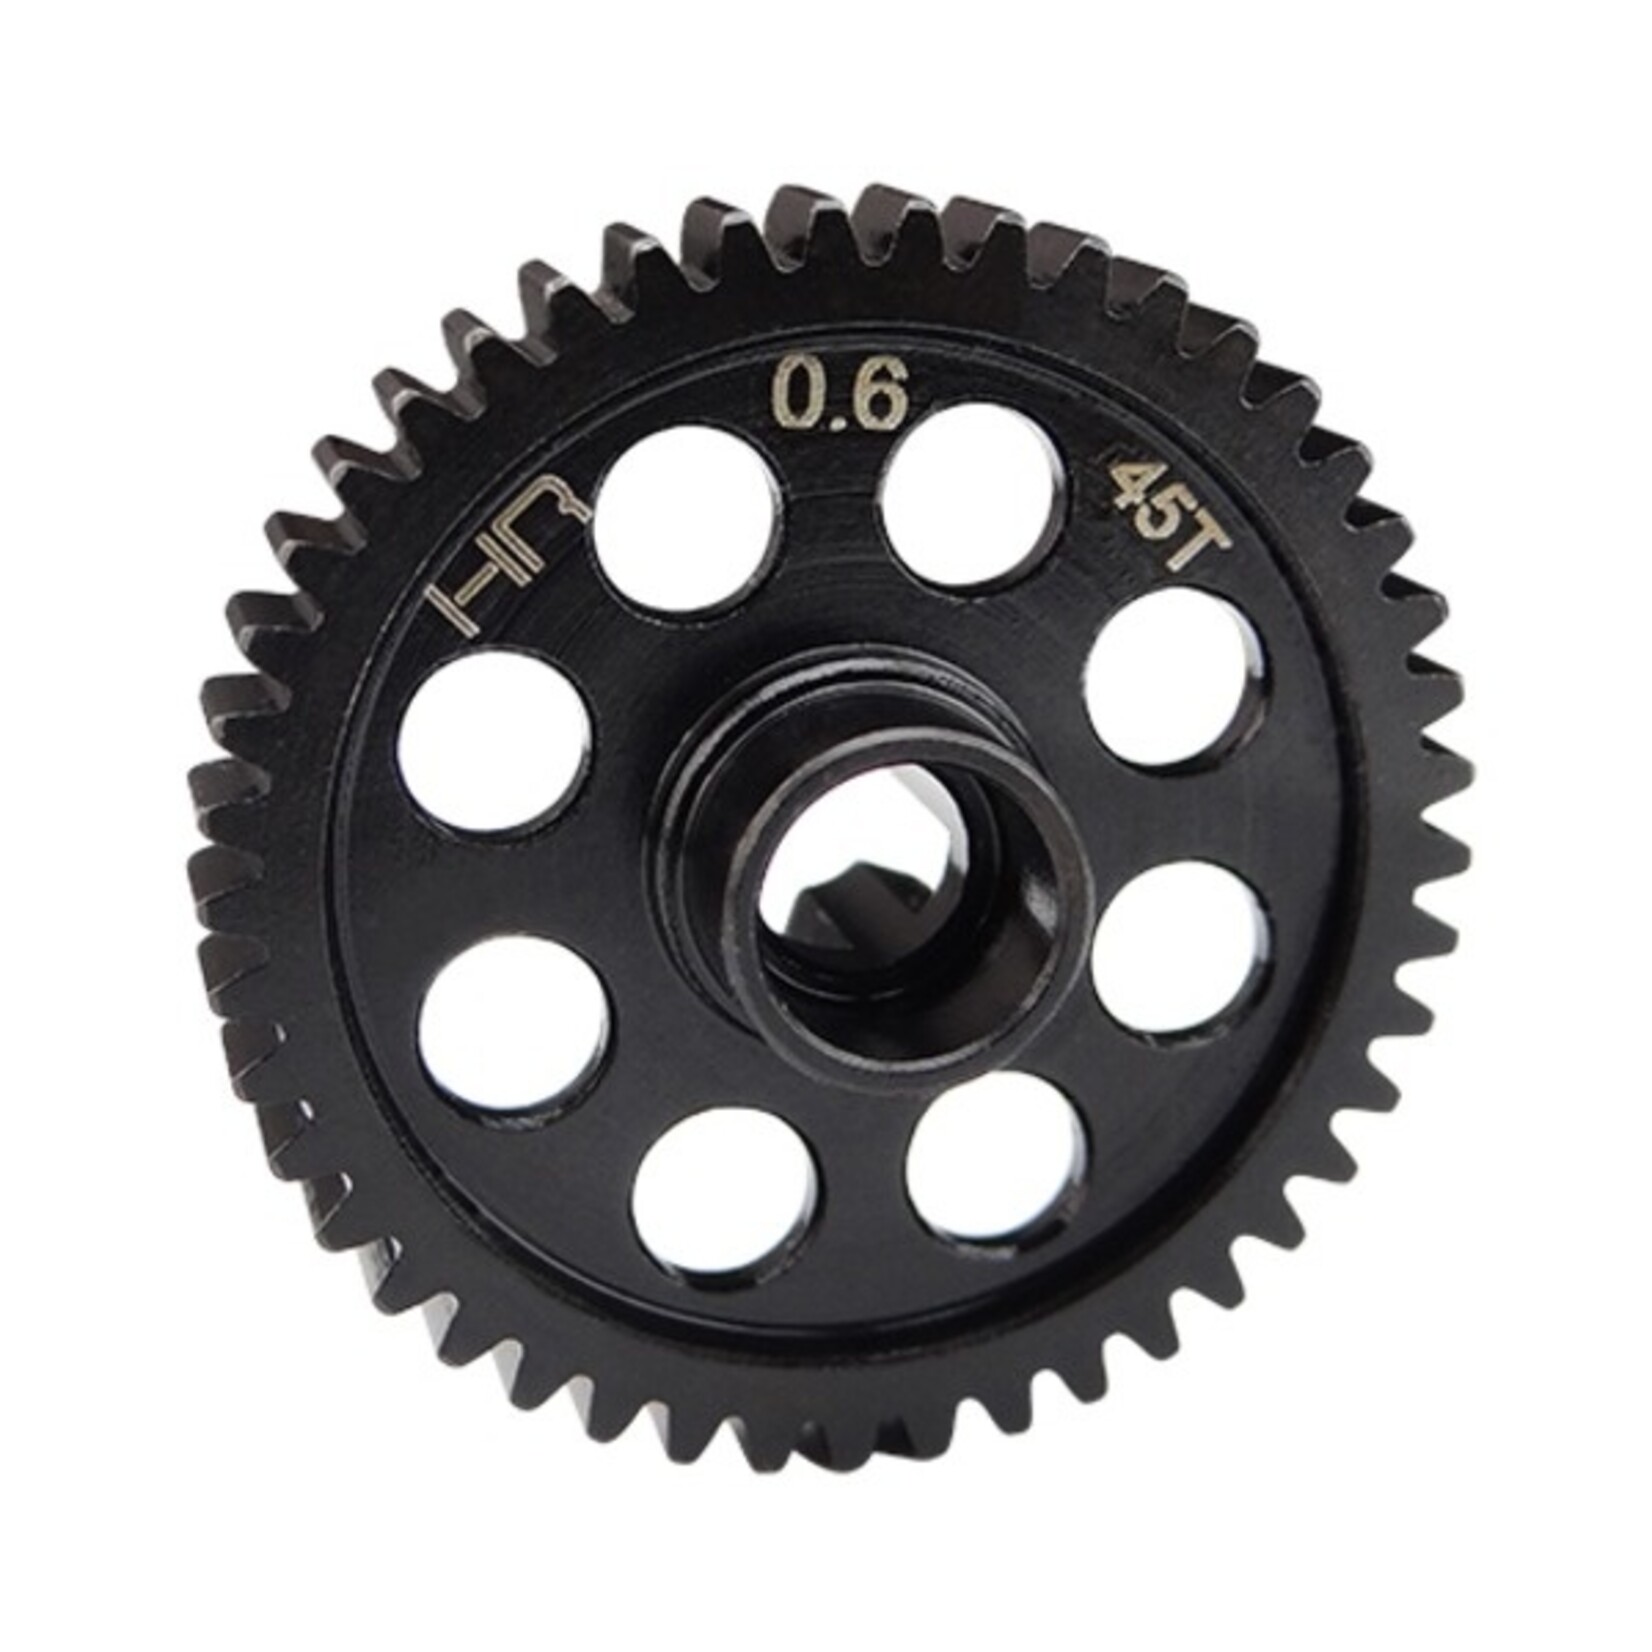 Hot Racing Steel Spur Gear, 45 tooth, for 1/8 Scale Dromida Vehicles